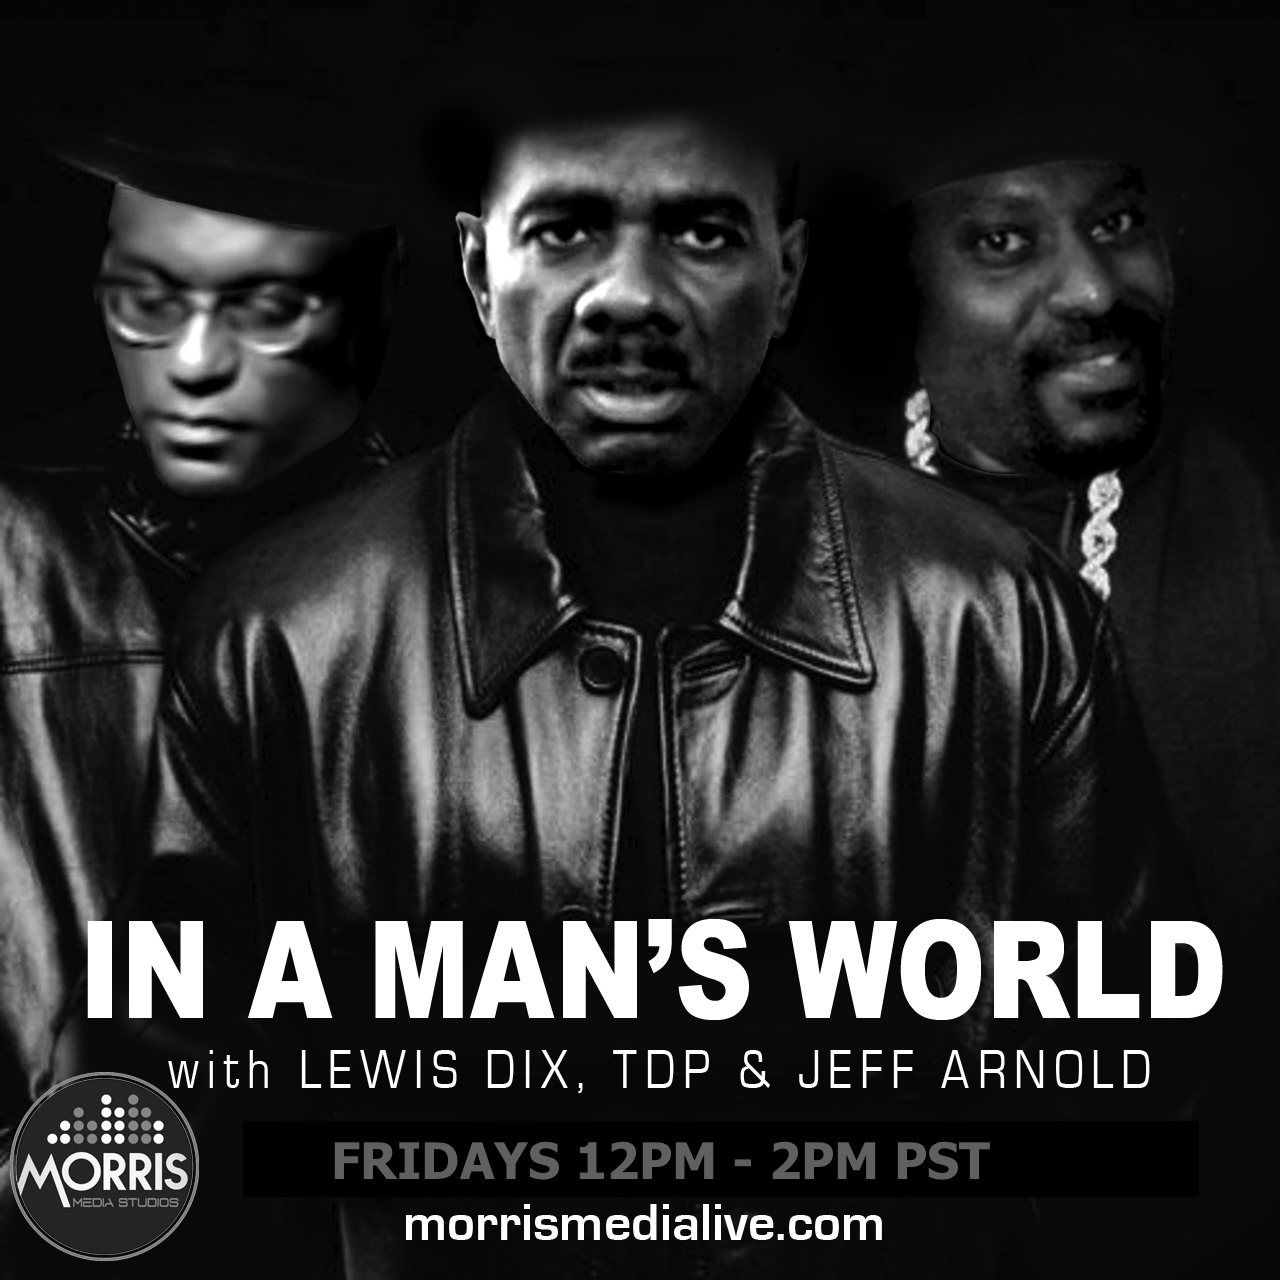 In A Man's World w/Lewis Dix, TDP & Jeff Arnold 5-25-18 